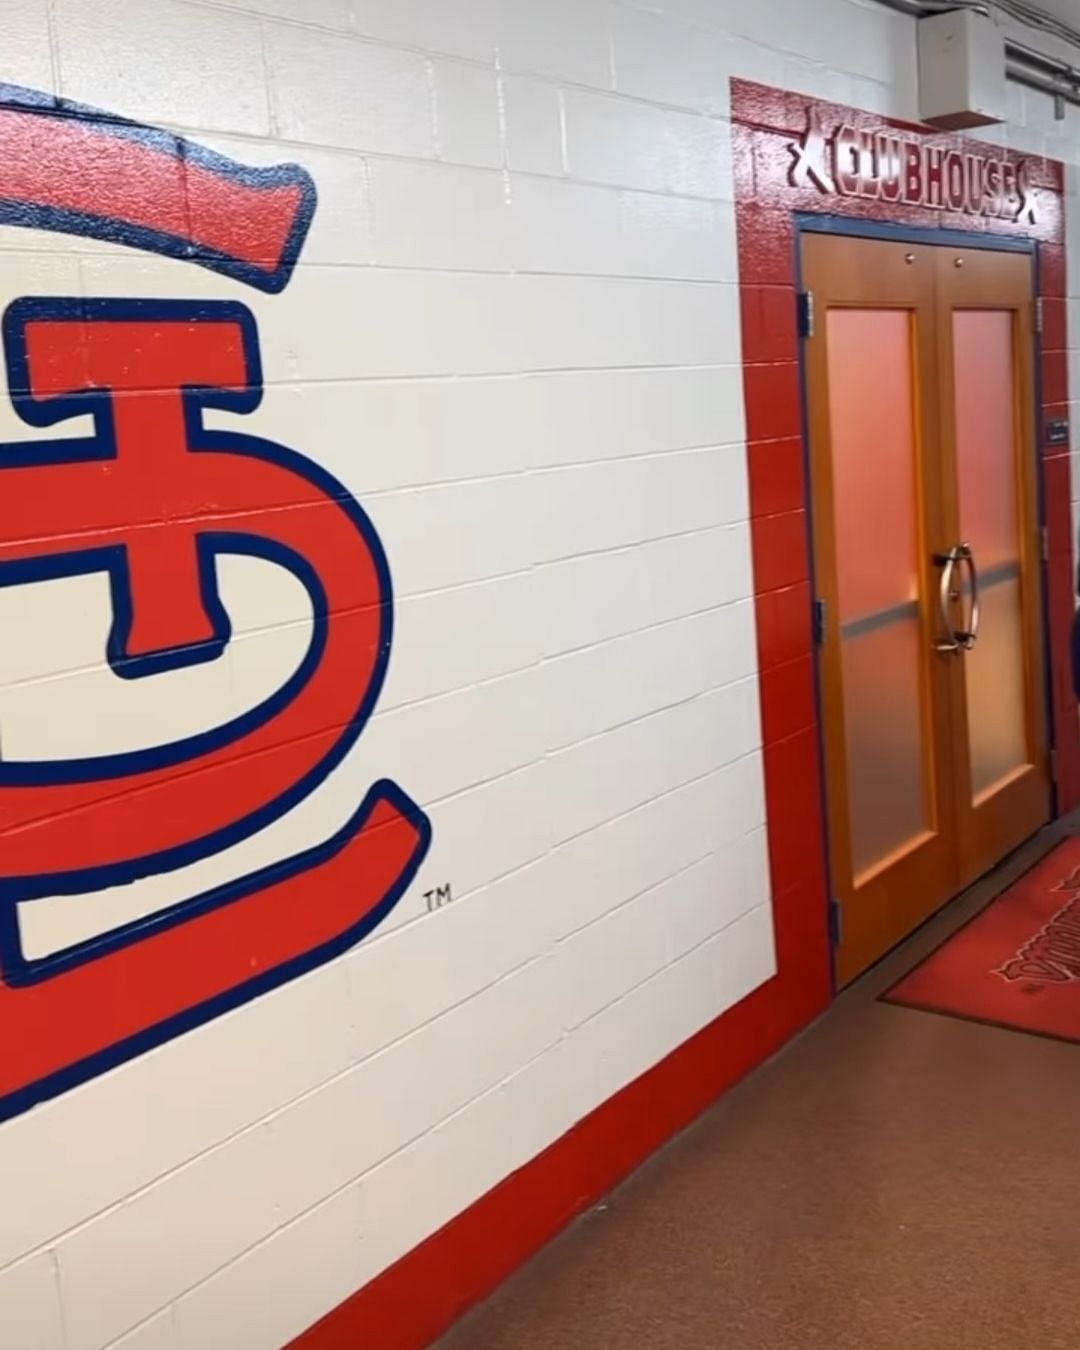 A view of the Cardinals clubhouse. Credit: @jacksonmahomes (IG)